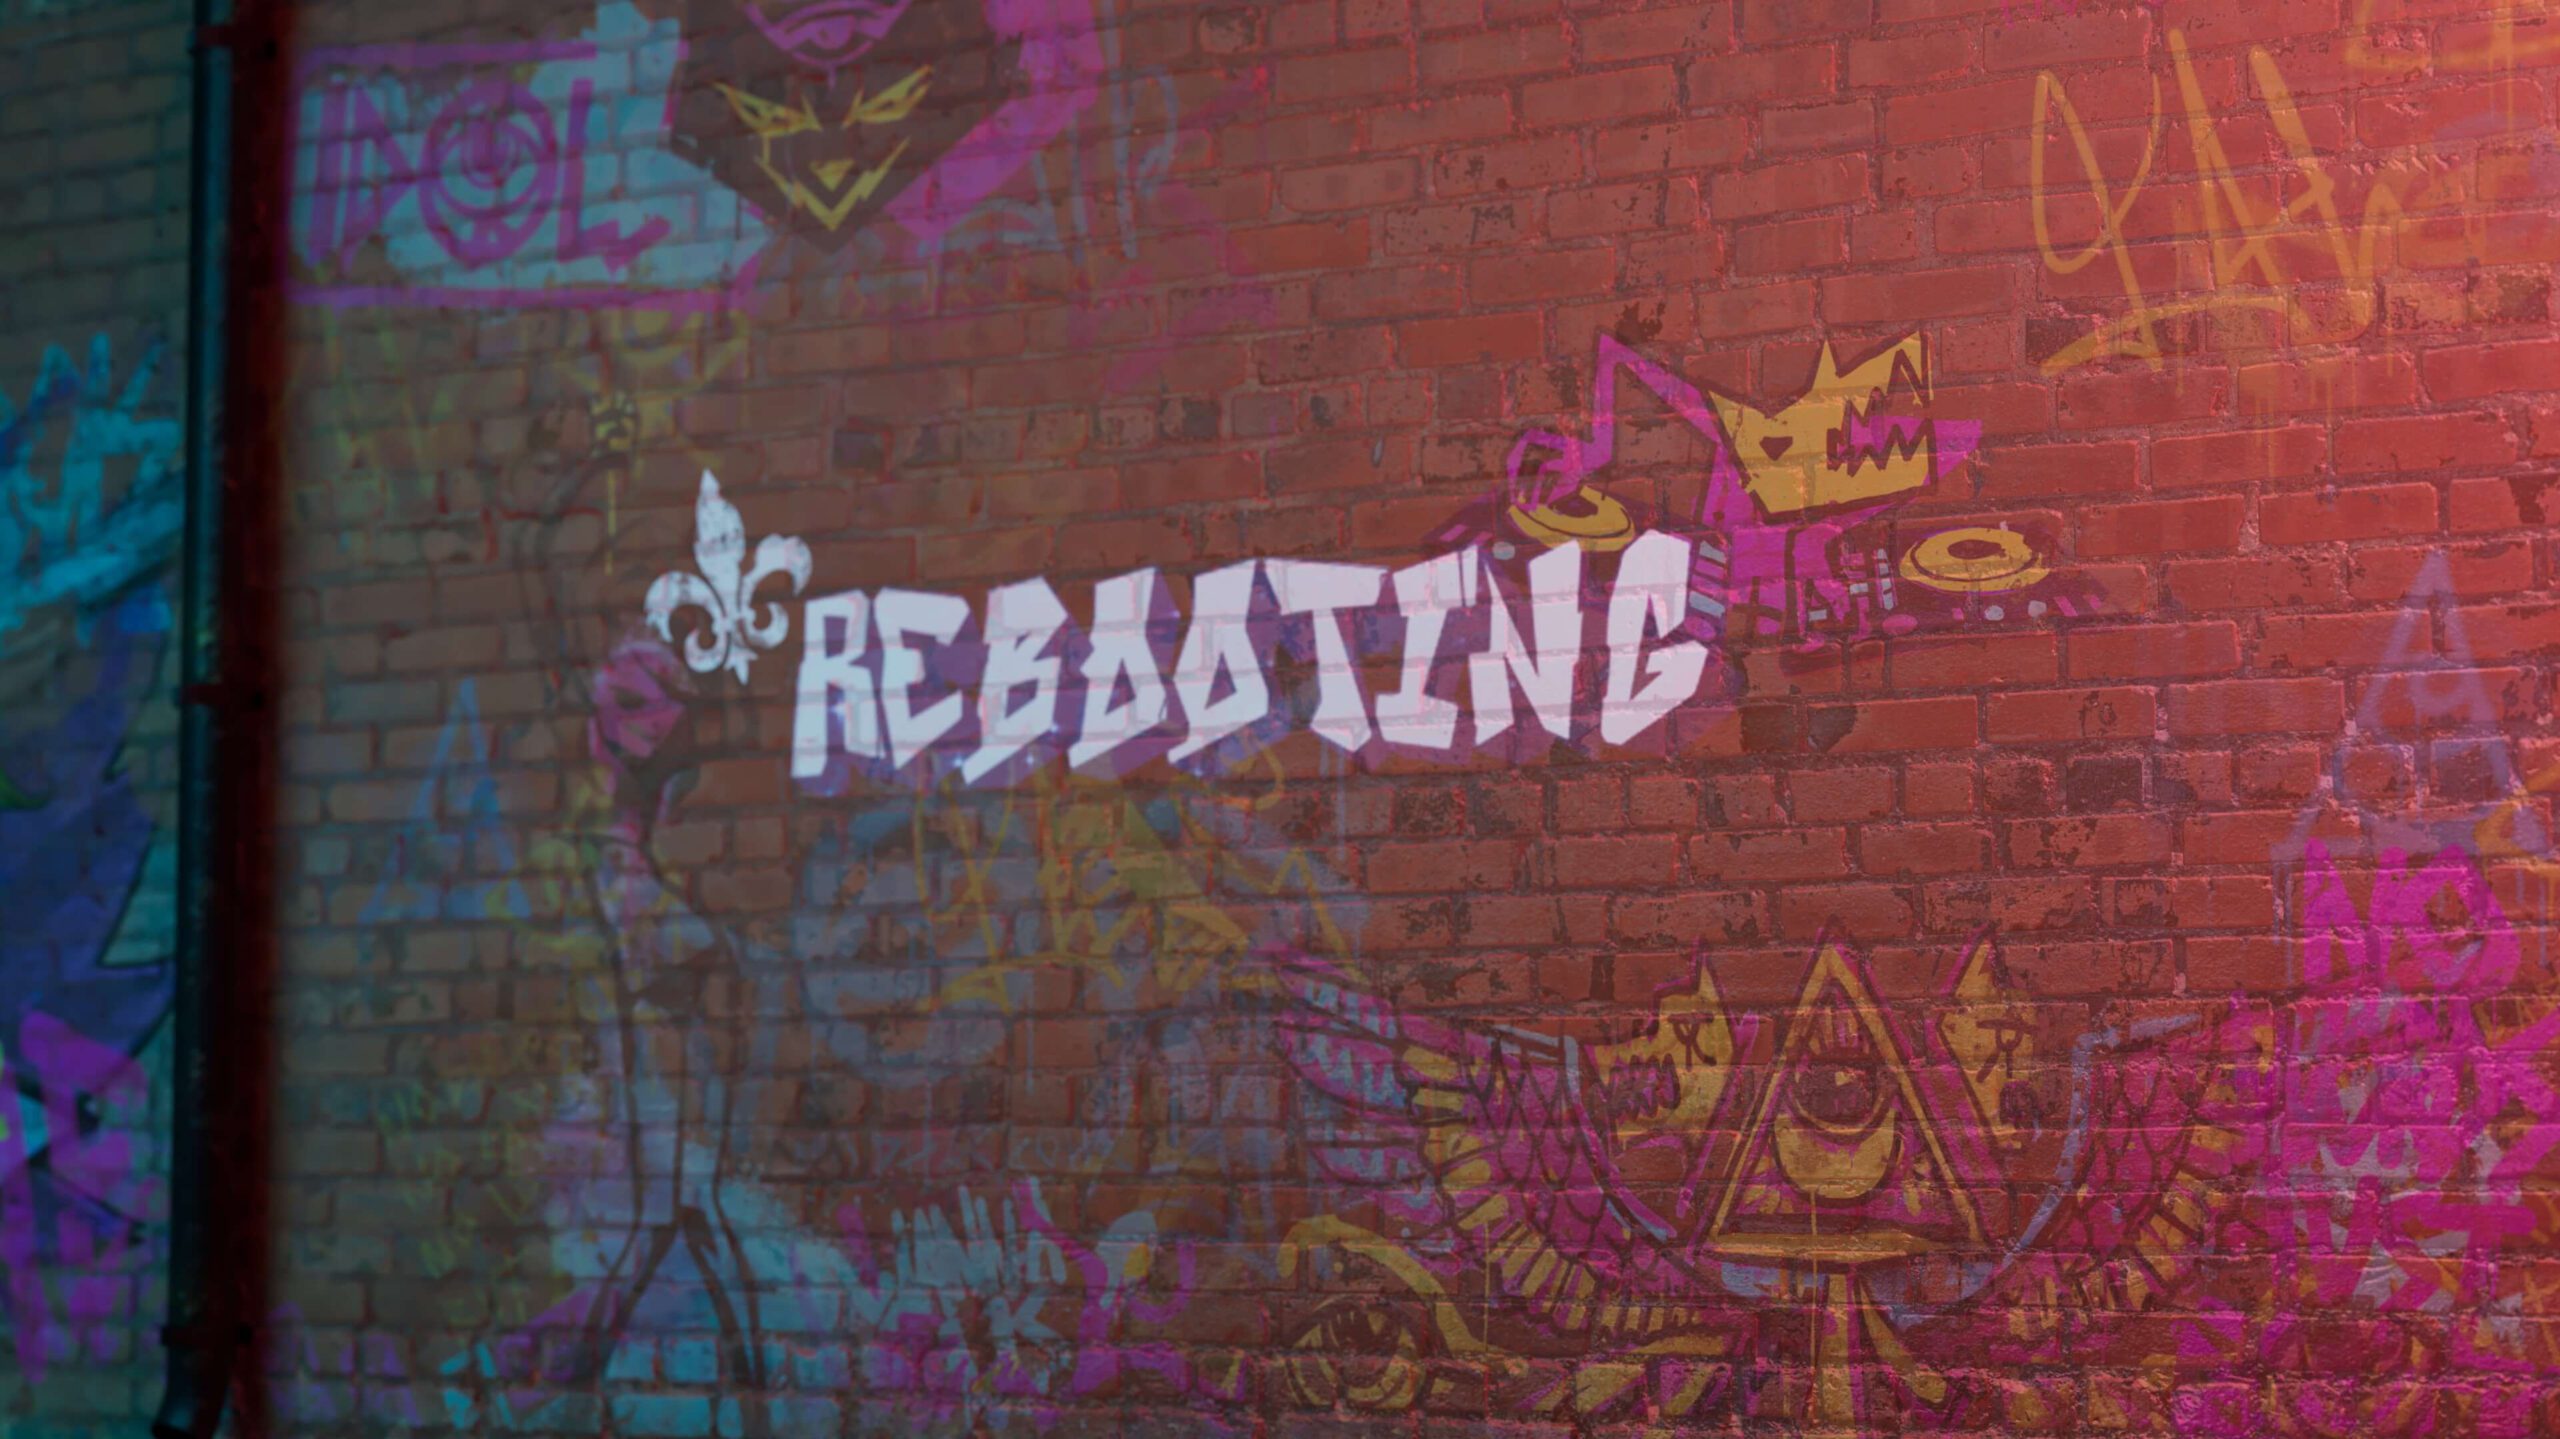 A graffiti teaser for the new Saints Row game